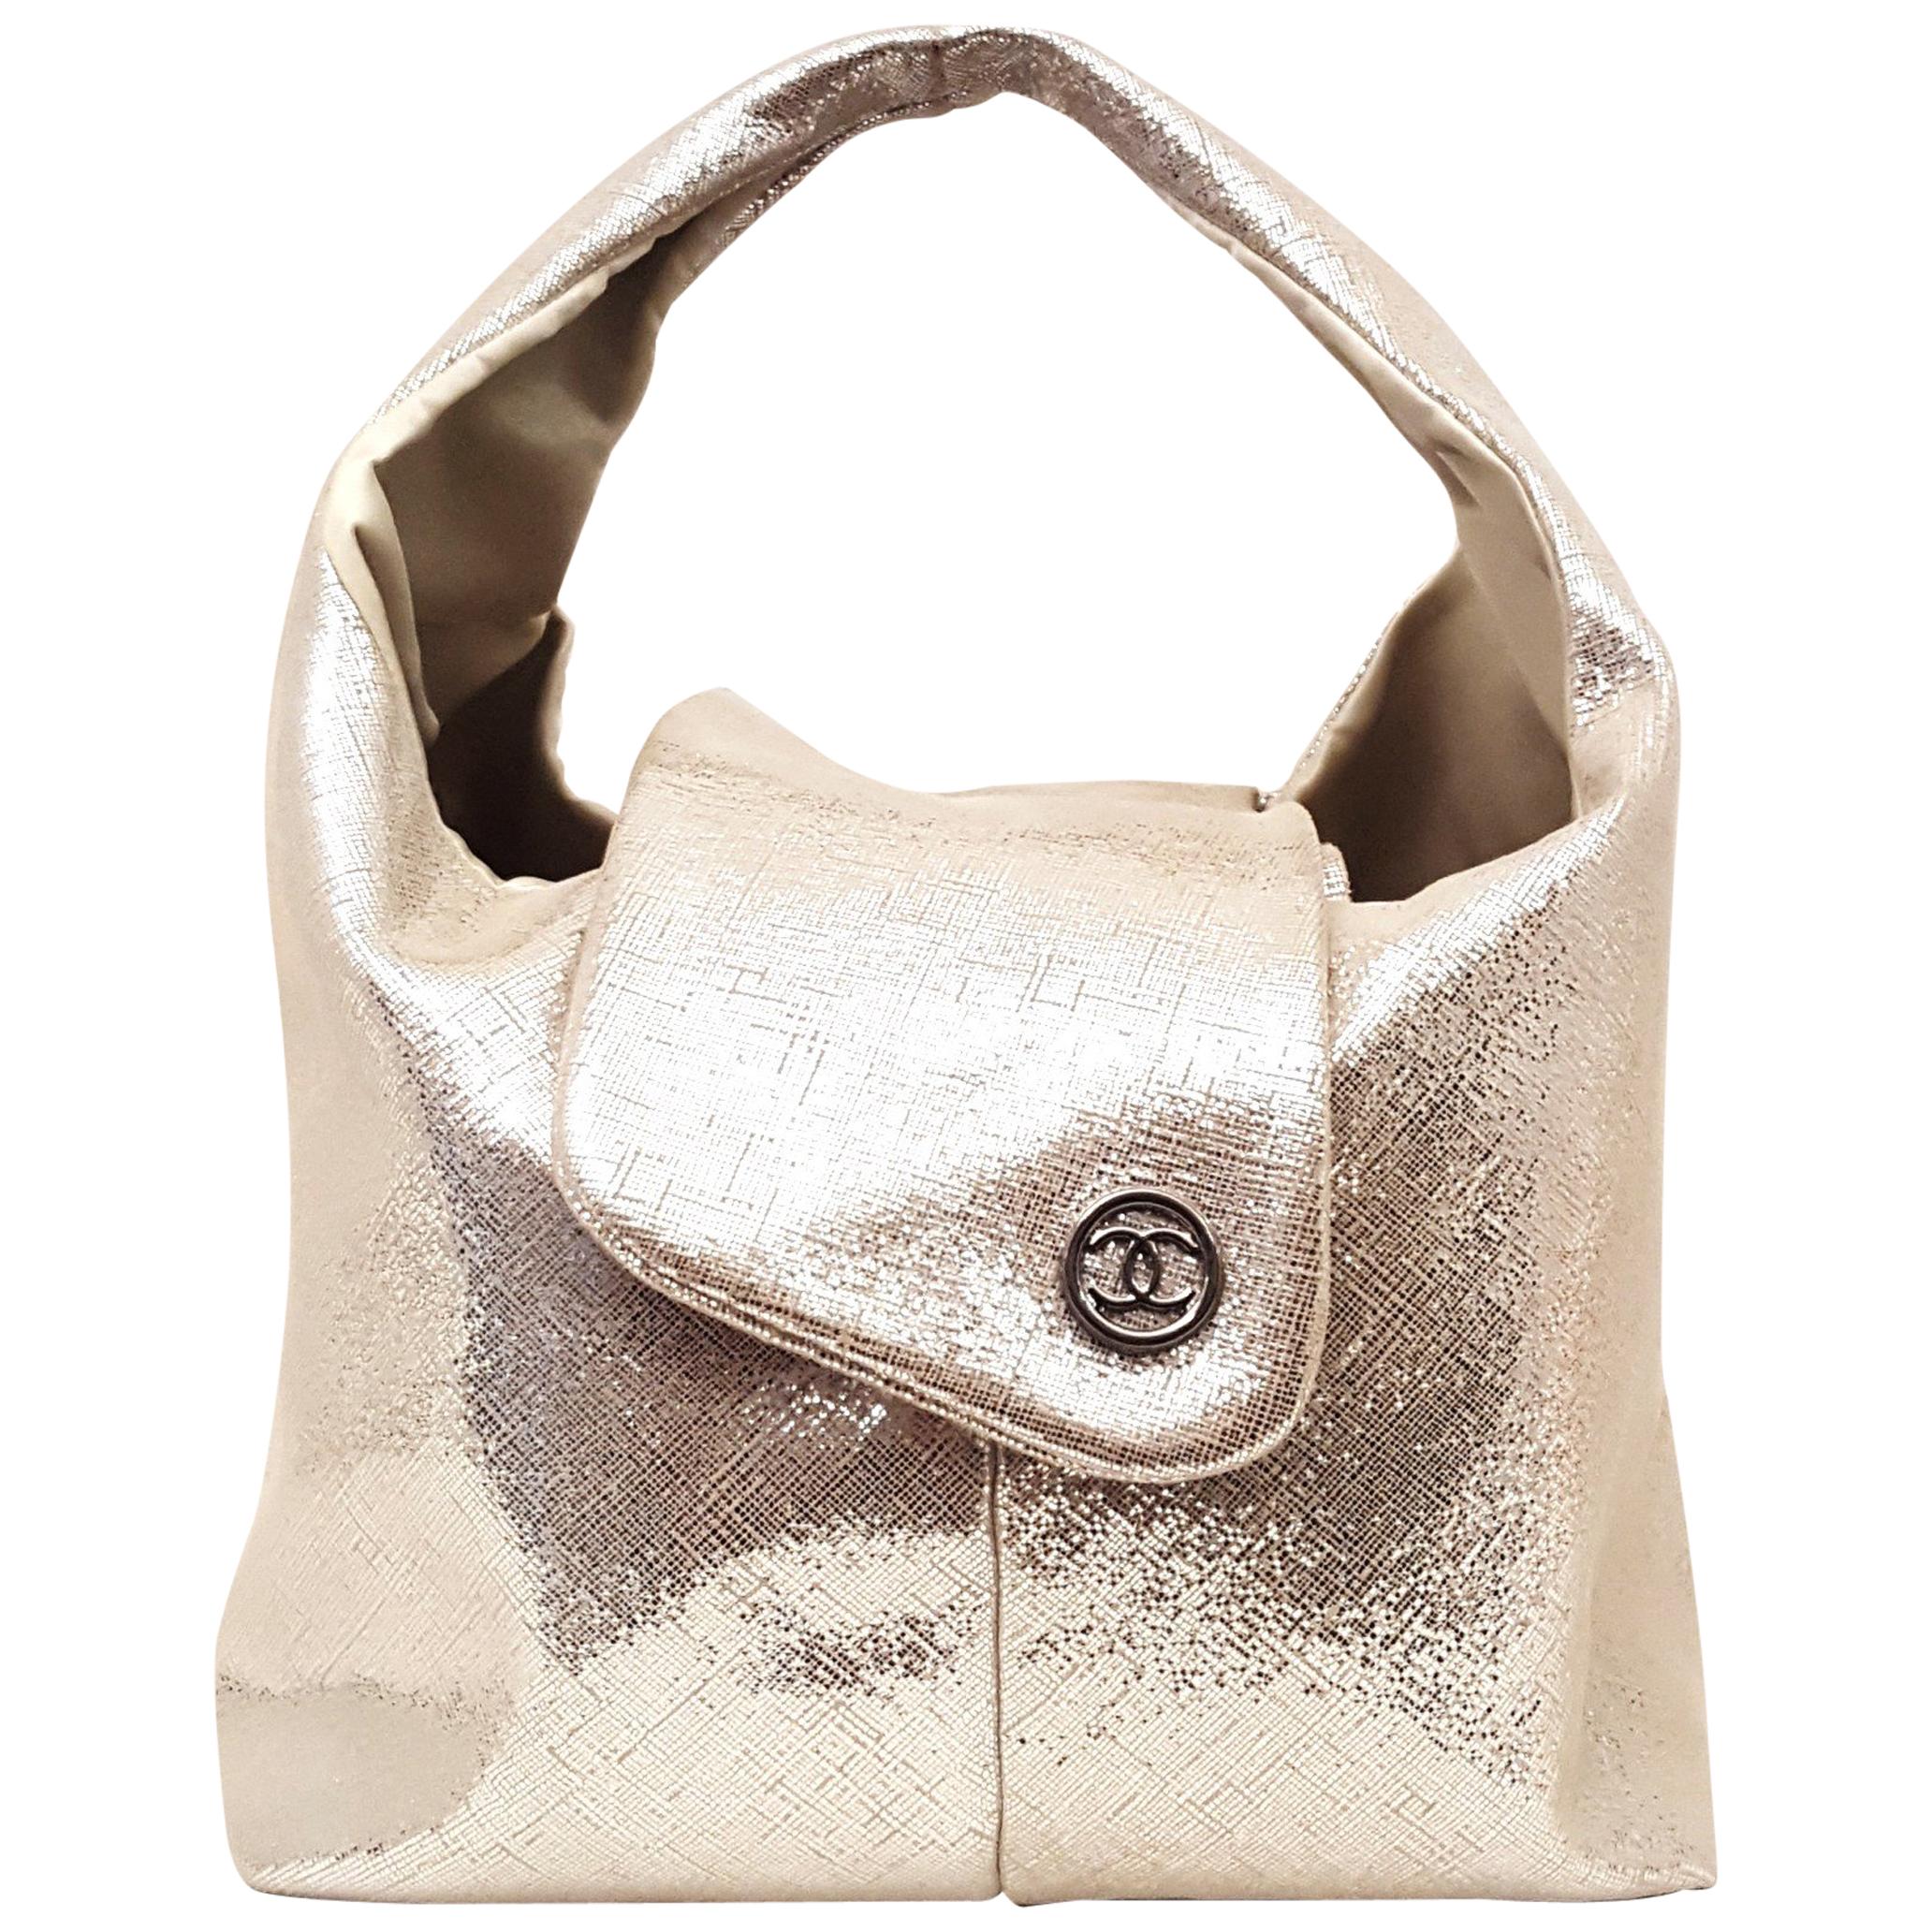 Chanel Champagne Color  Metallic Lame Mini Hobo Bag with Two Flaps for Closure